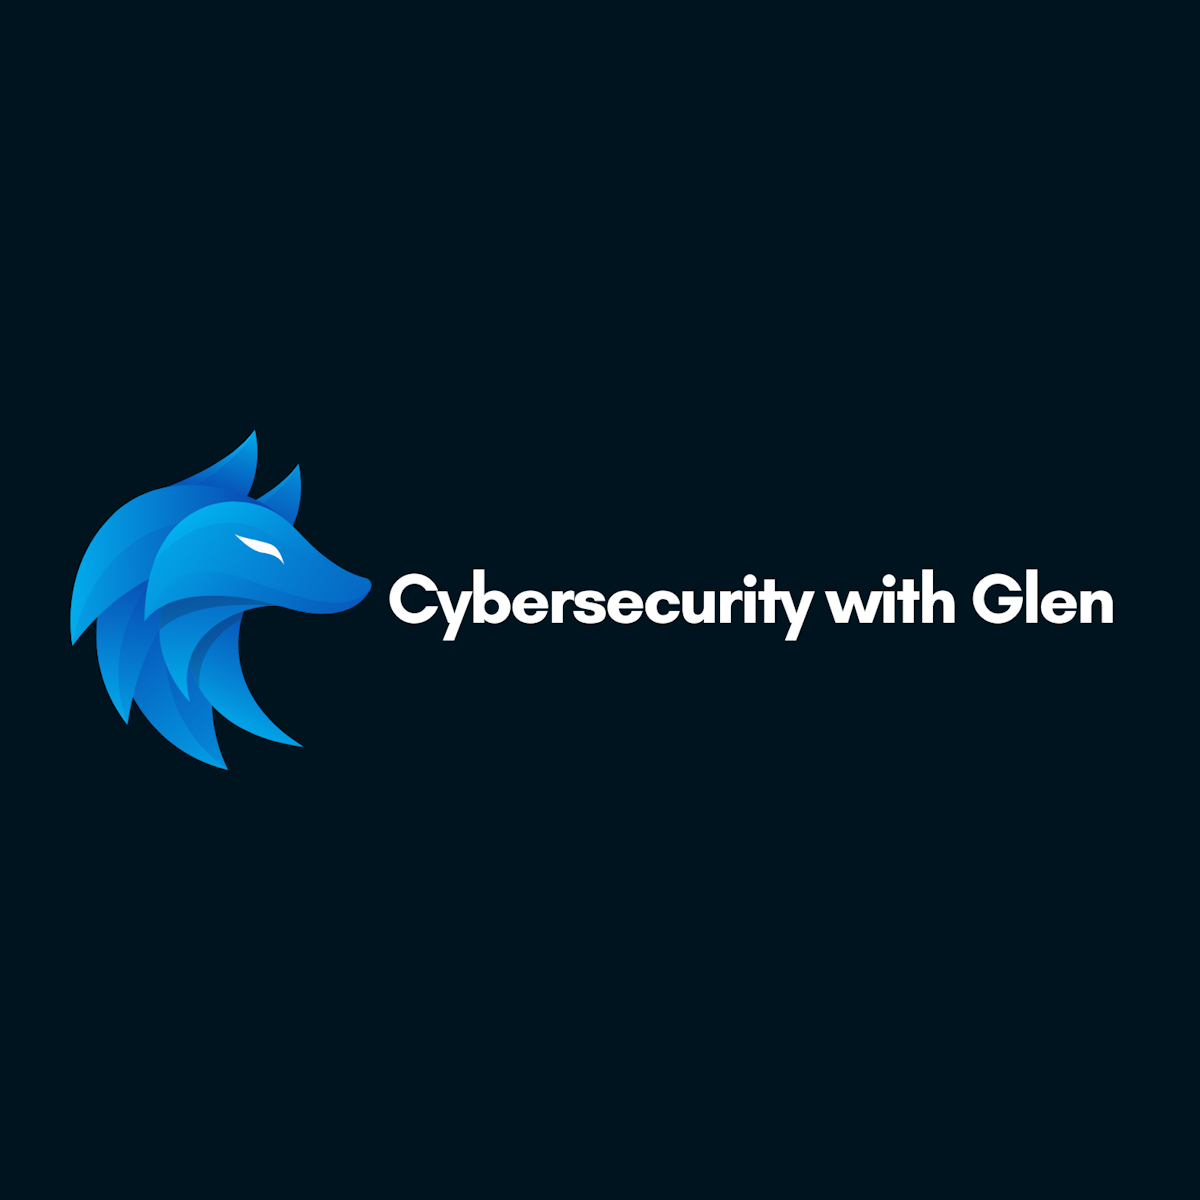 Cybersecurity with Glen